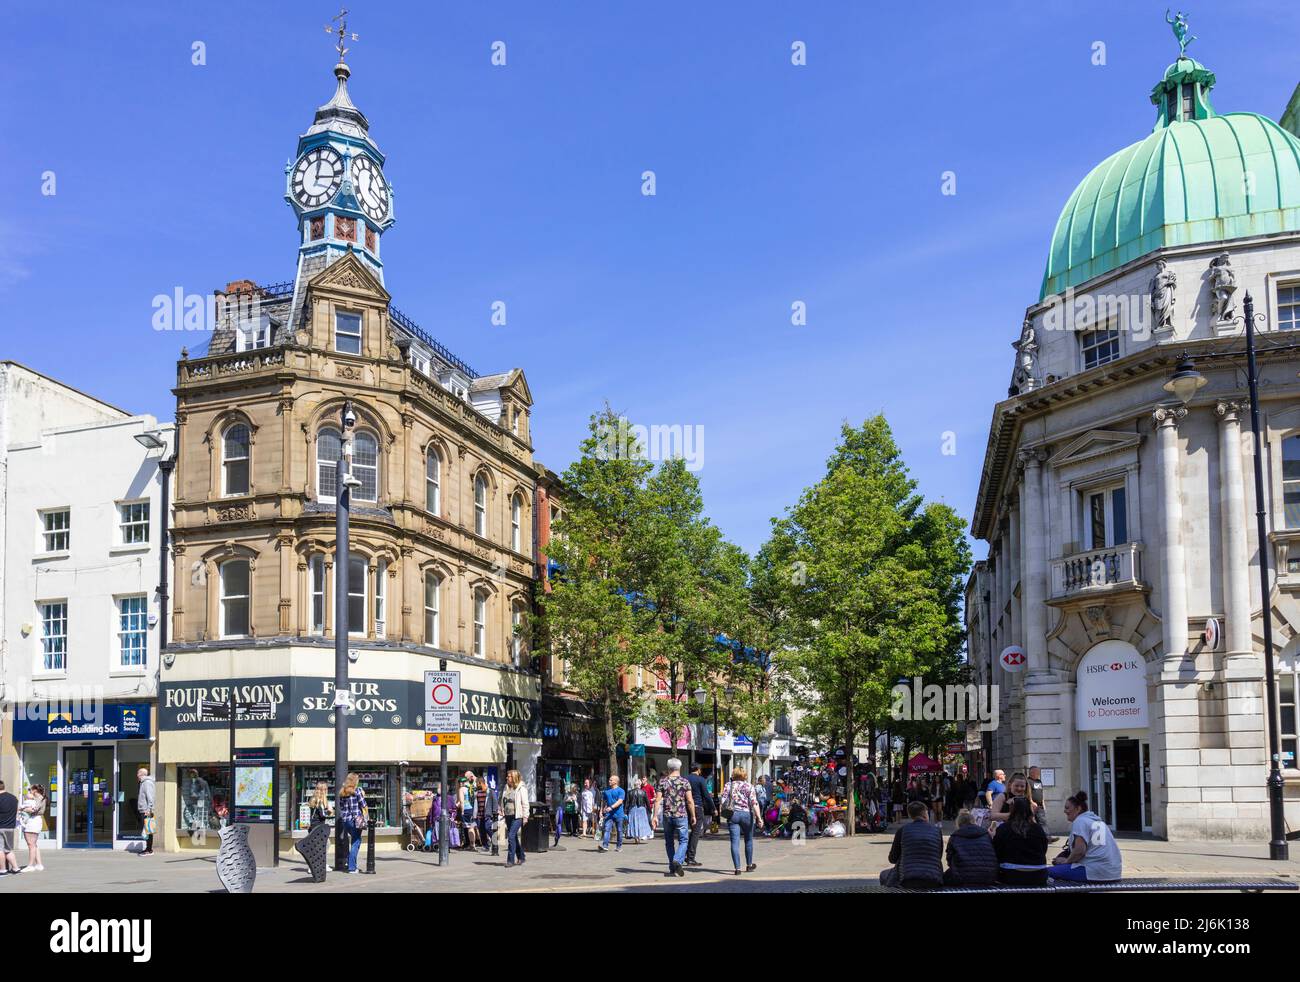 Doncaster town centre and shoppers on High street and Baxter Gate  in the town centre of Doncaster South Yorkshire England  UK GB Europe Stock Photo